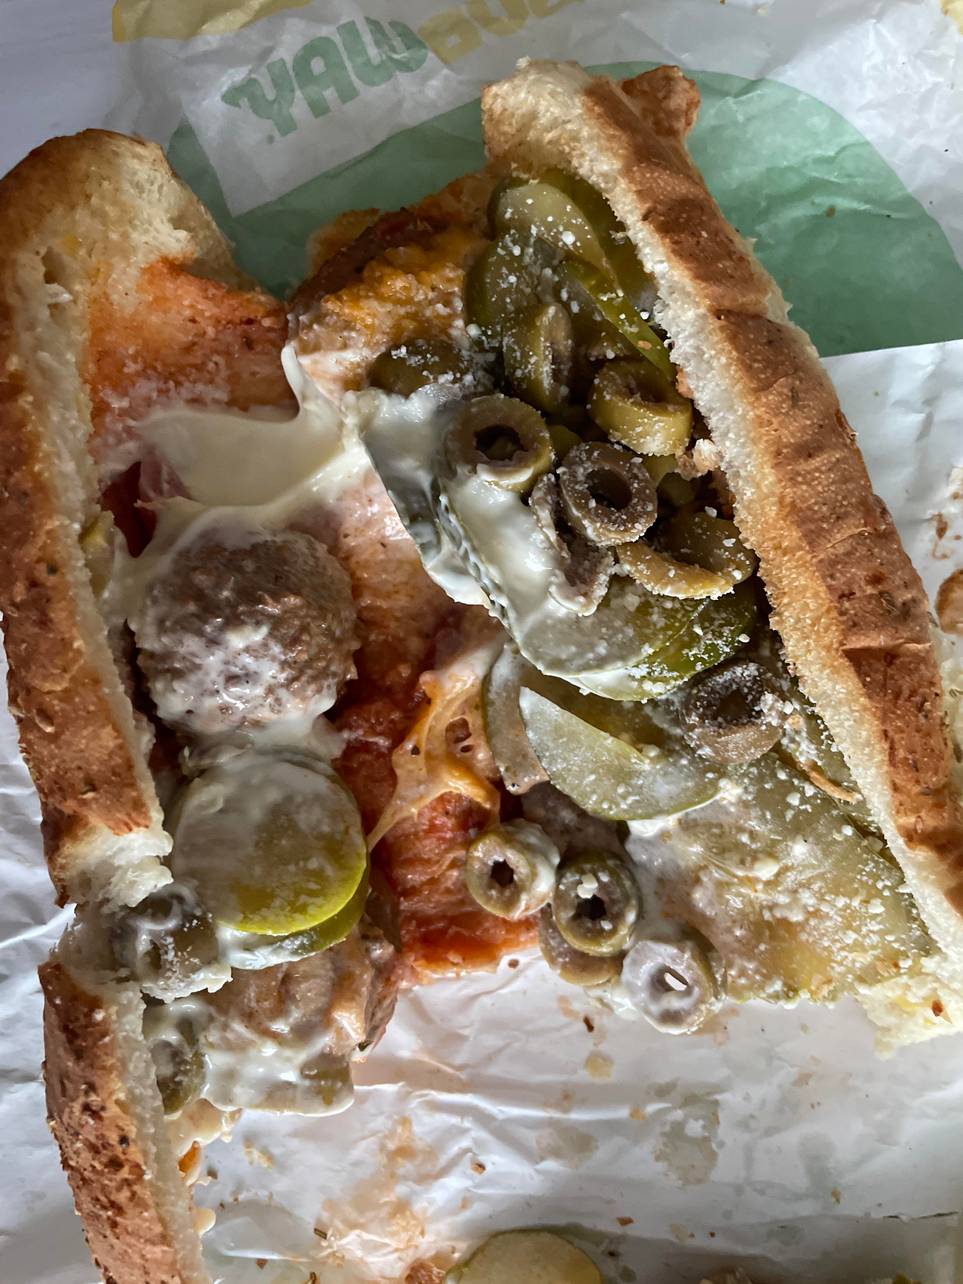 What Kind Of Pickles Does Subway Use In 2022? (+ Other Common FAQs)